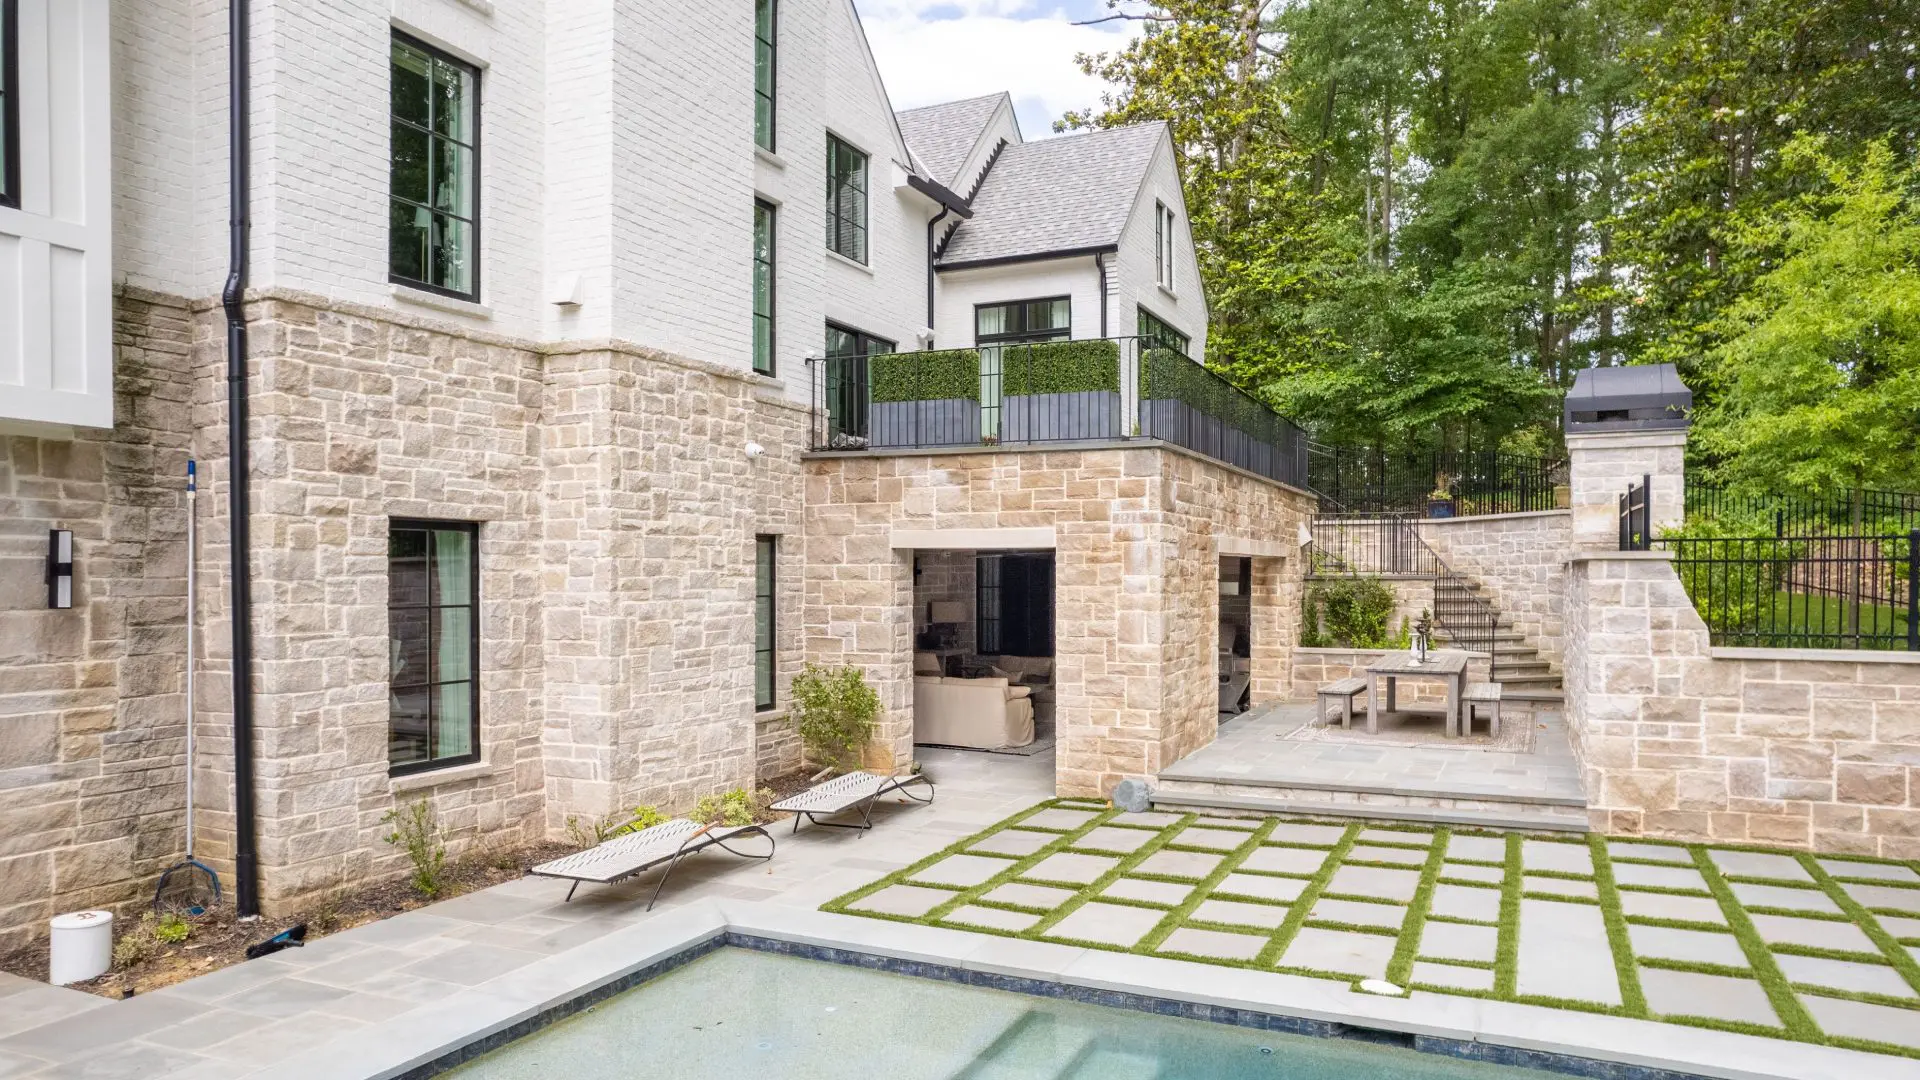 A large pool and patio area with a stone wall.